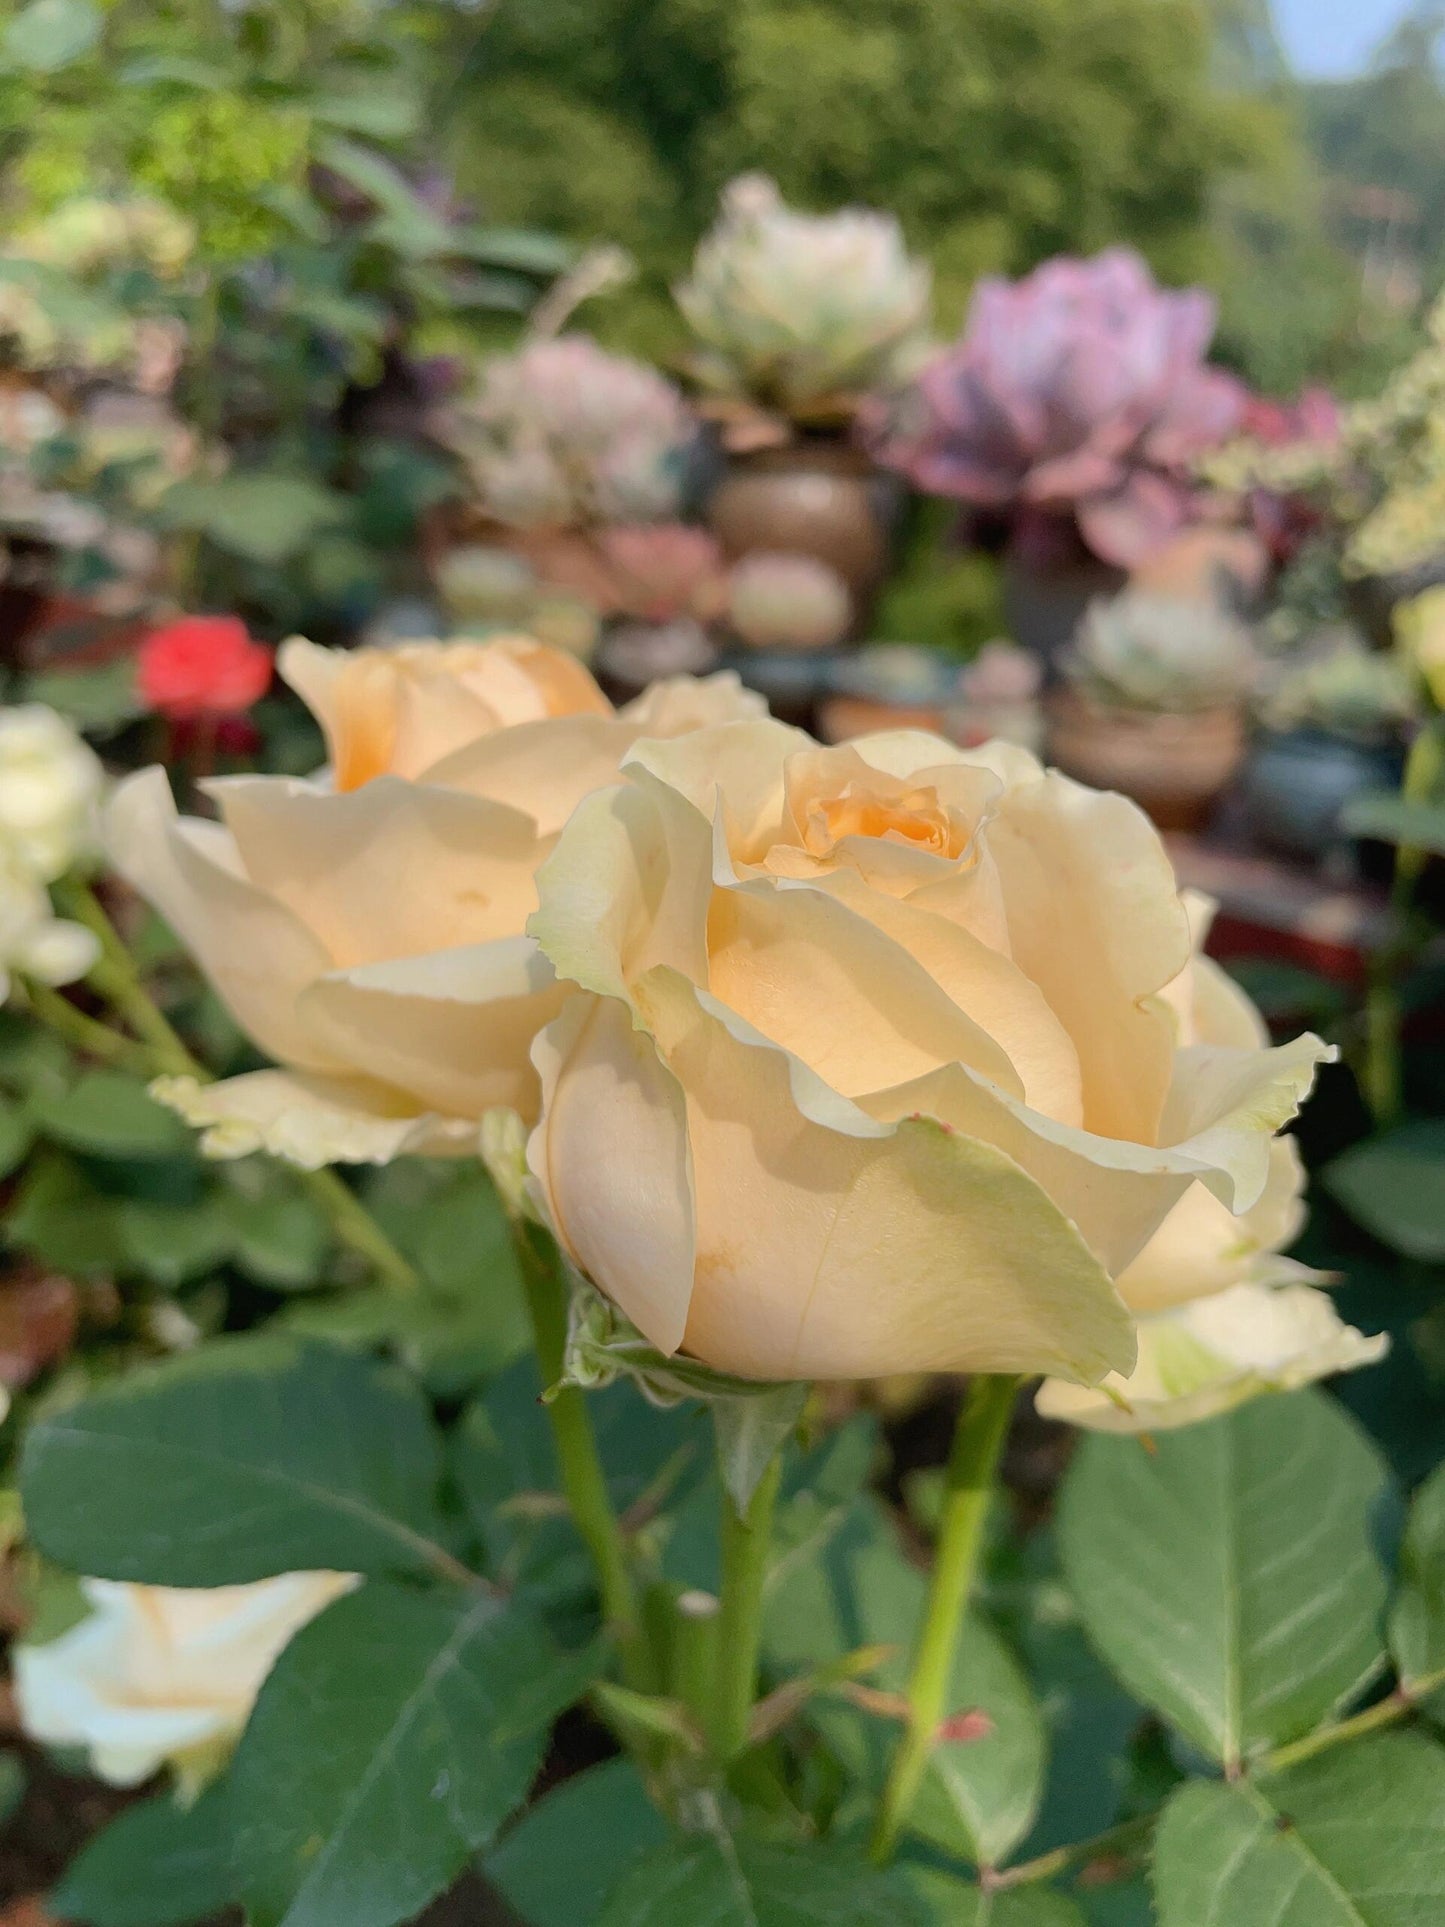 Champagne Rosa【Peach Avalanche】-Own Root| Thornless Cutting Rose| Long flowering period| Popularity| Award| 蜜桃雪山 |Blooms Abundantly|